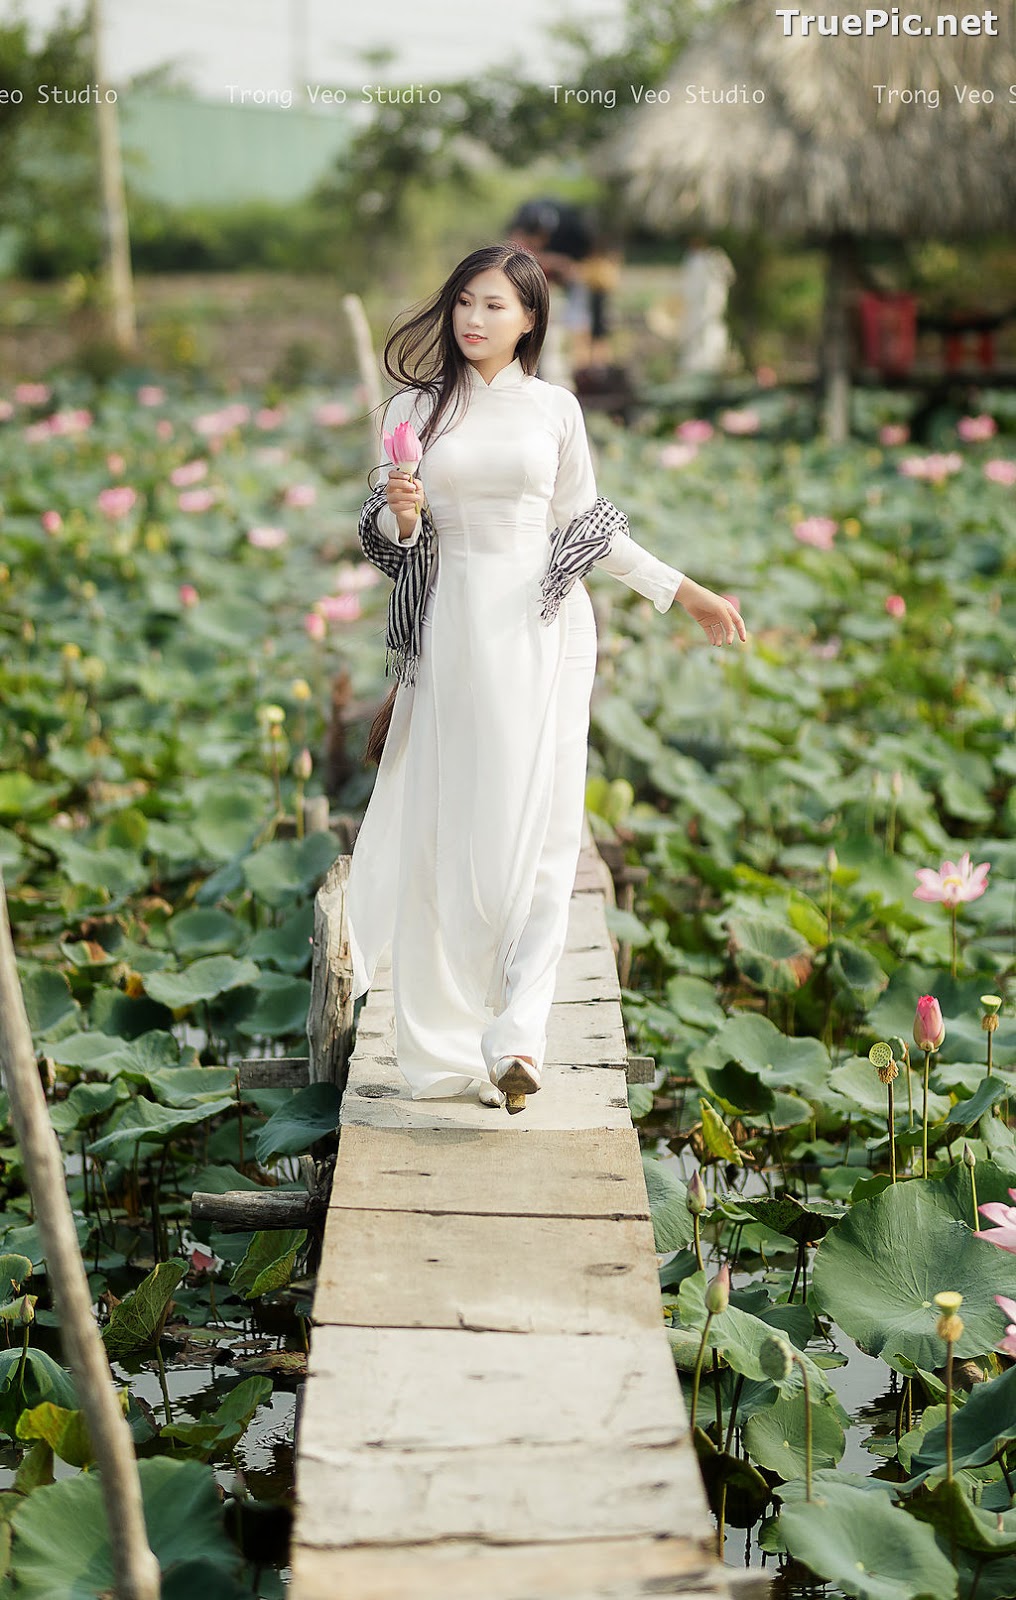 Image The Beauty of Vietnamese Girls with Traditional Dress (Ao Dai) #3 - TruePic.net - Picture-62